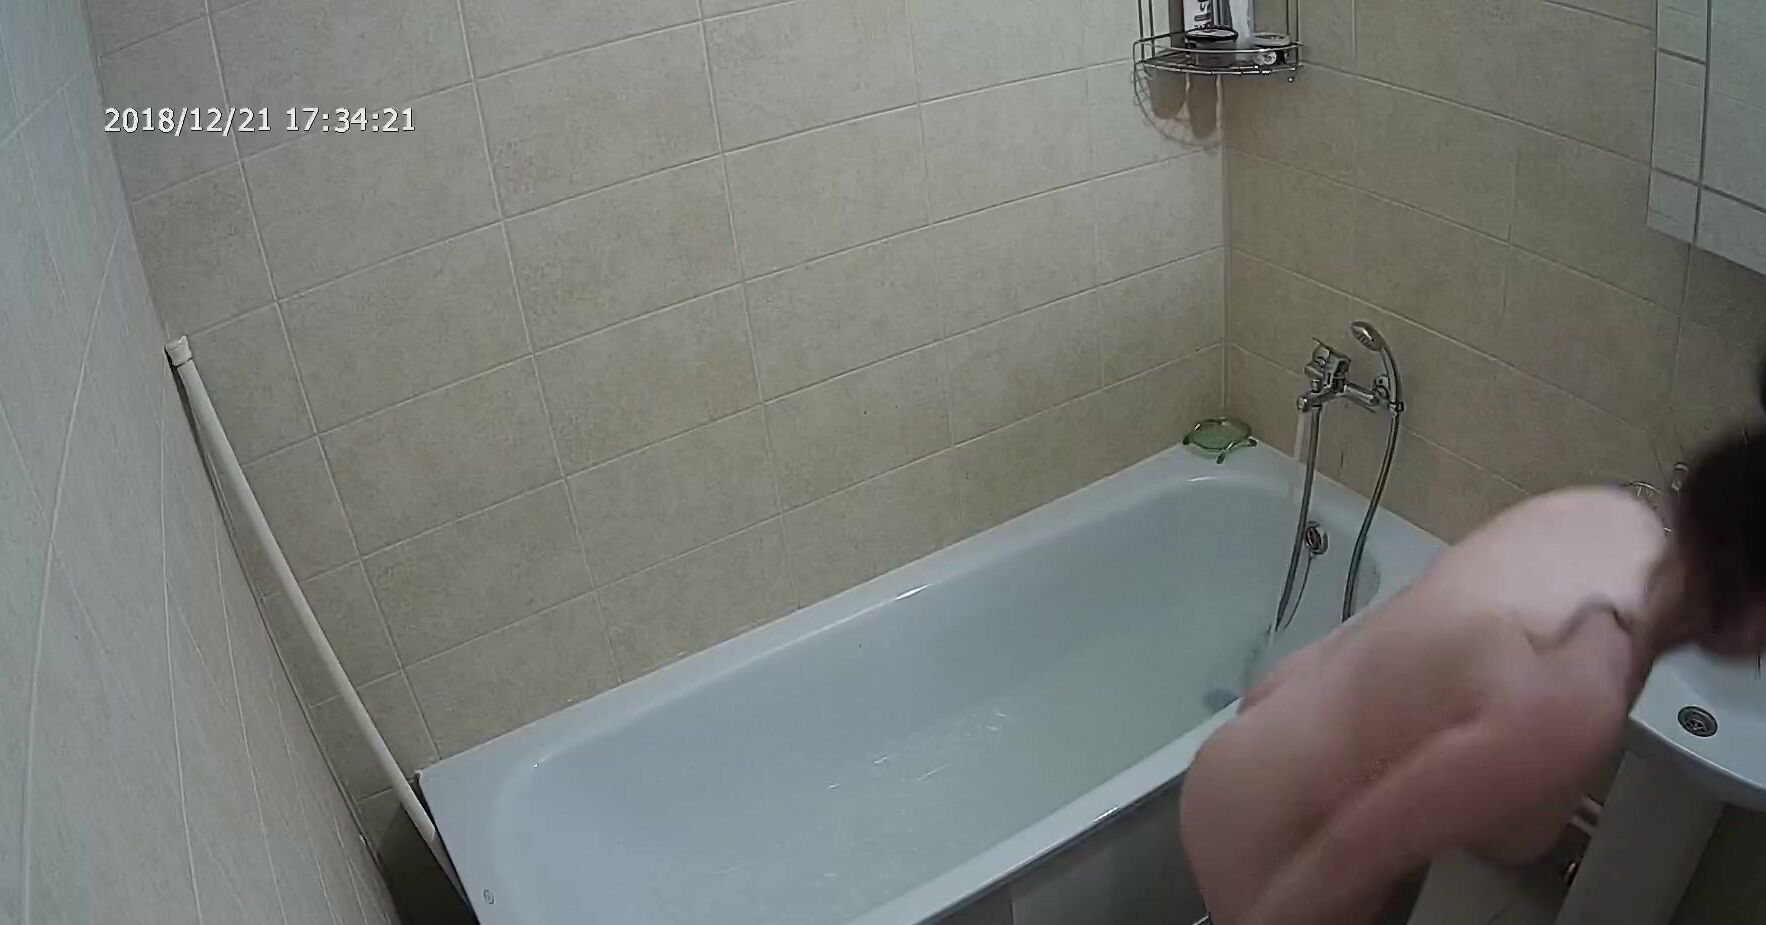 Boys Watching Girls Bathing In Hd - I put a hidden cam in the bathroom and I caught sister using the bathtub |  AREA51.PORN